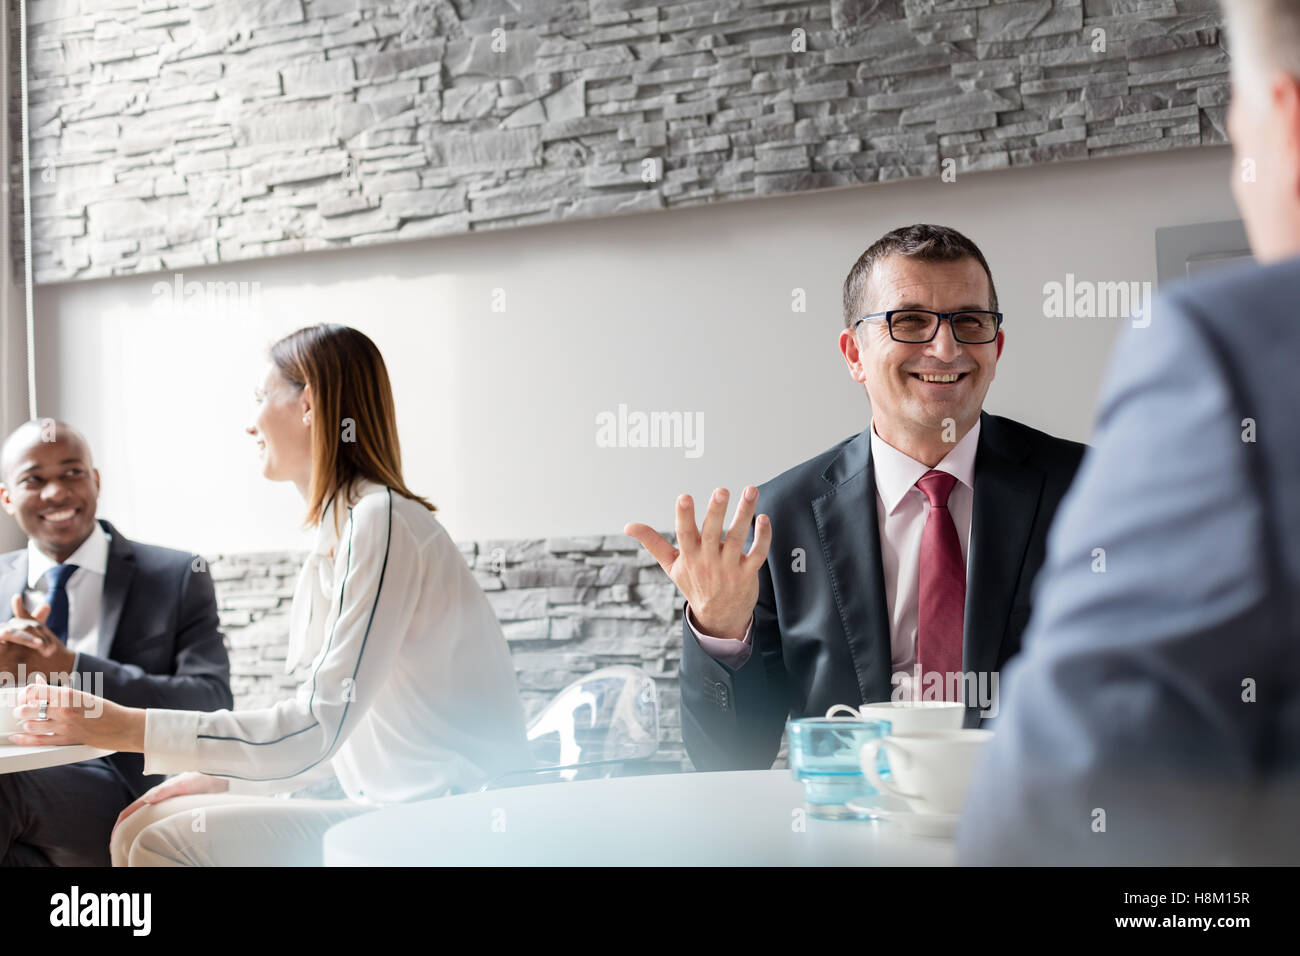 Smiling Young man with male colleague in office cafeteria Banque D'Images